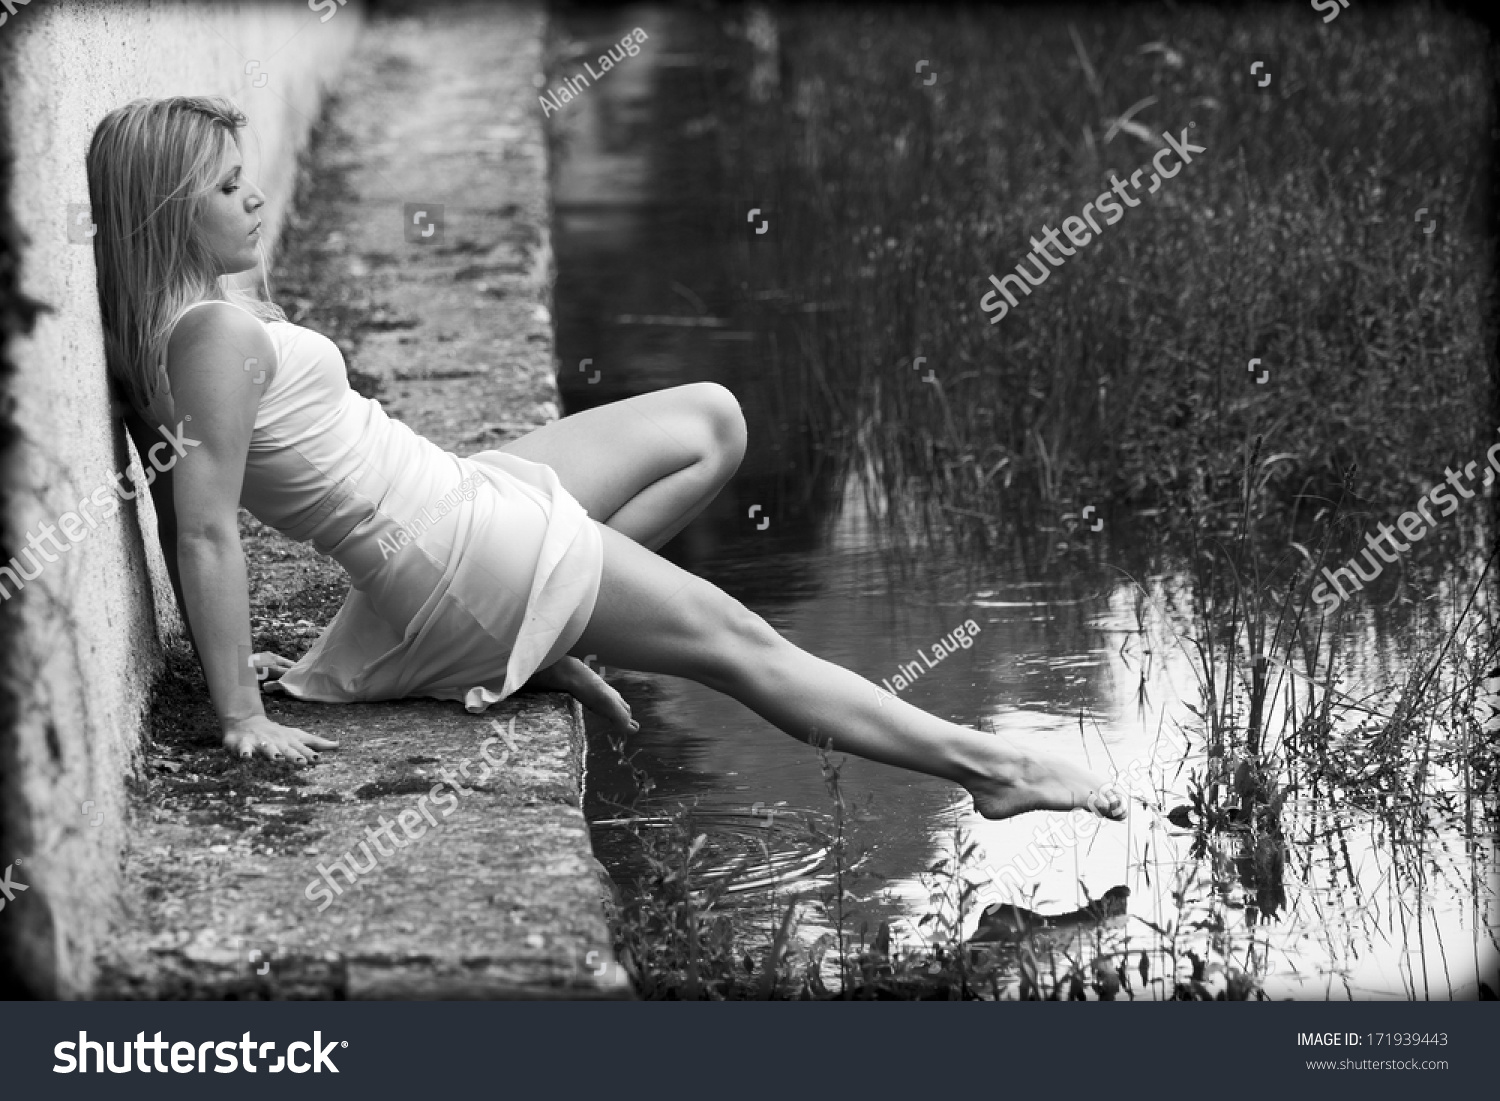 https://image.shutterstock.com/z/stock-photo-blonde-woman-wearing-a-white-dress-is-sitting-on-the-edge-of-a-pond-she-is-barefoot-she-tries-171939443.jpg